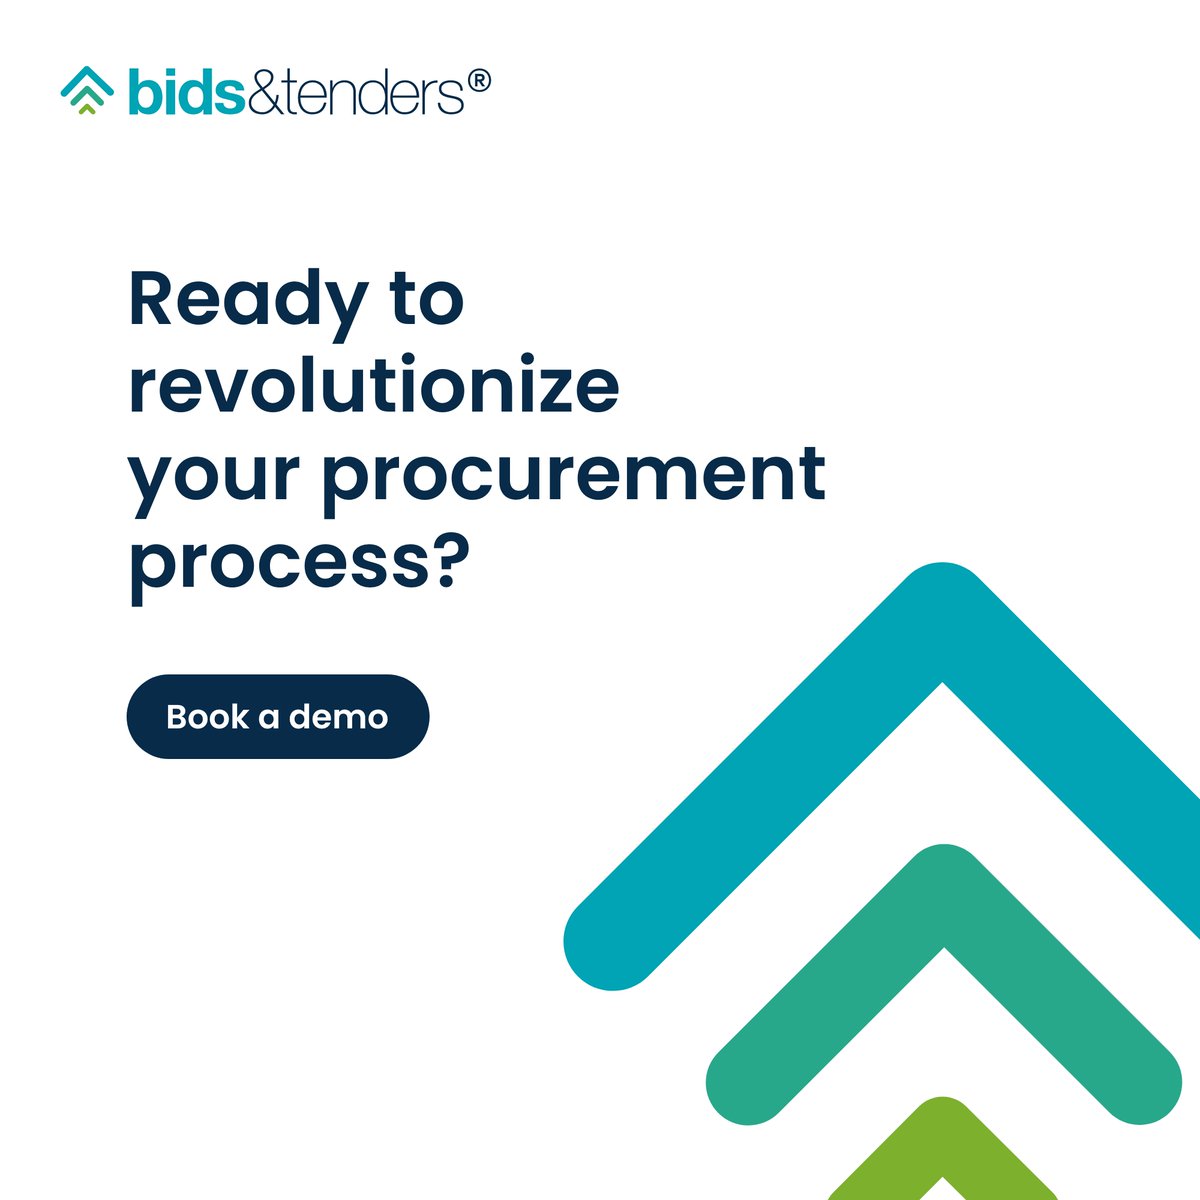 Ready to revolutionize your procurement process?  Book a personalized demo today and discover the power of seamless eProcurement, streamlined workflows, and tailored solutions designed to fit your needs. 
hubs.ly/Q02tZl1j0
#eProcurement #SoftwareDemo #DigitalProcurement